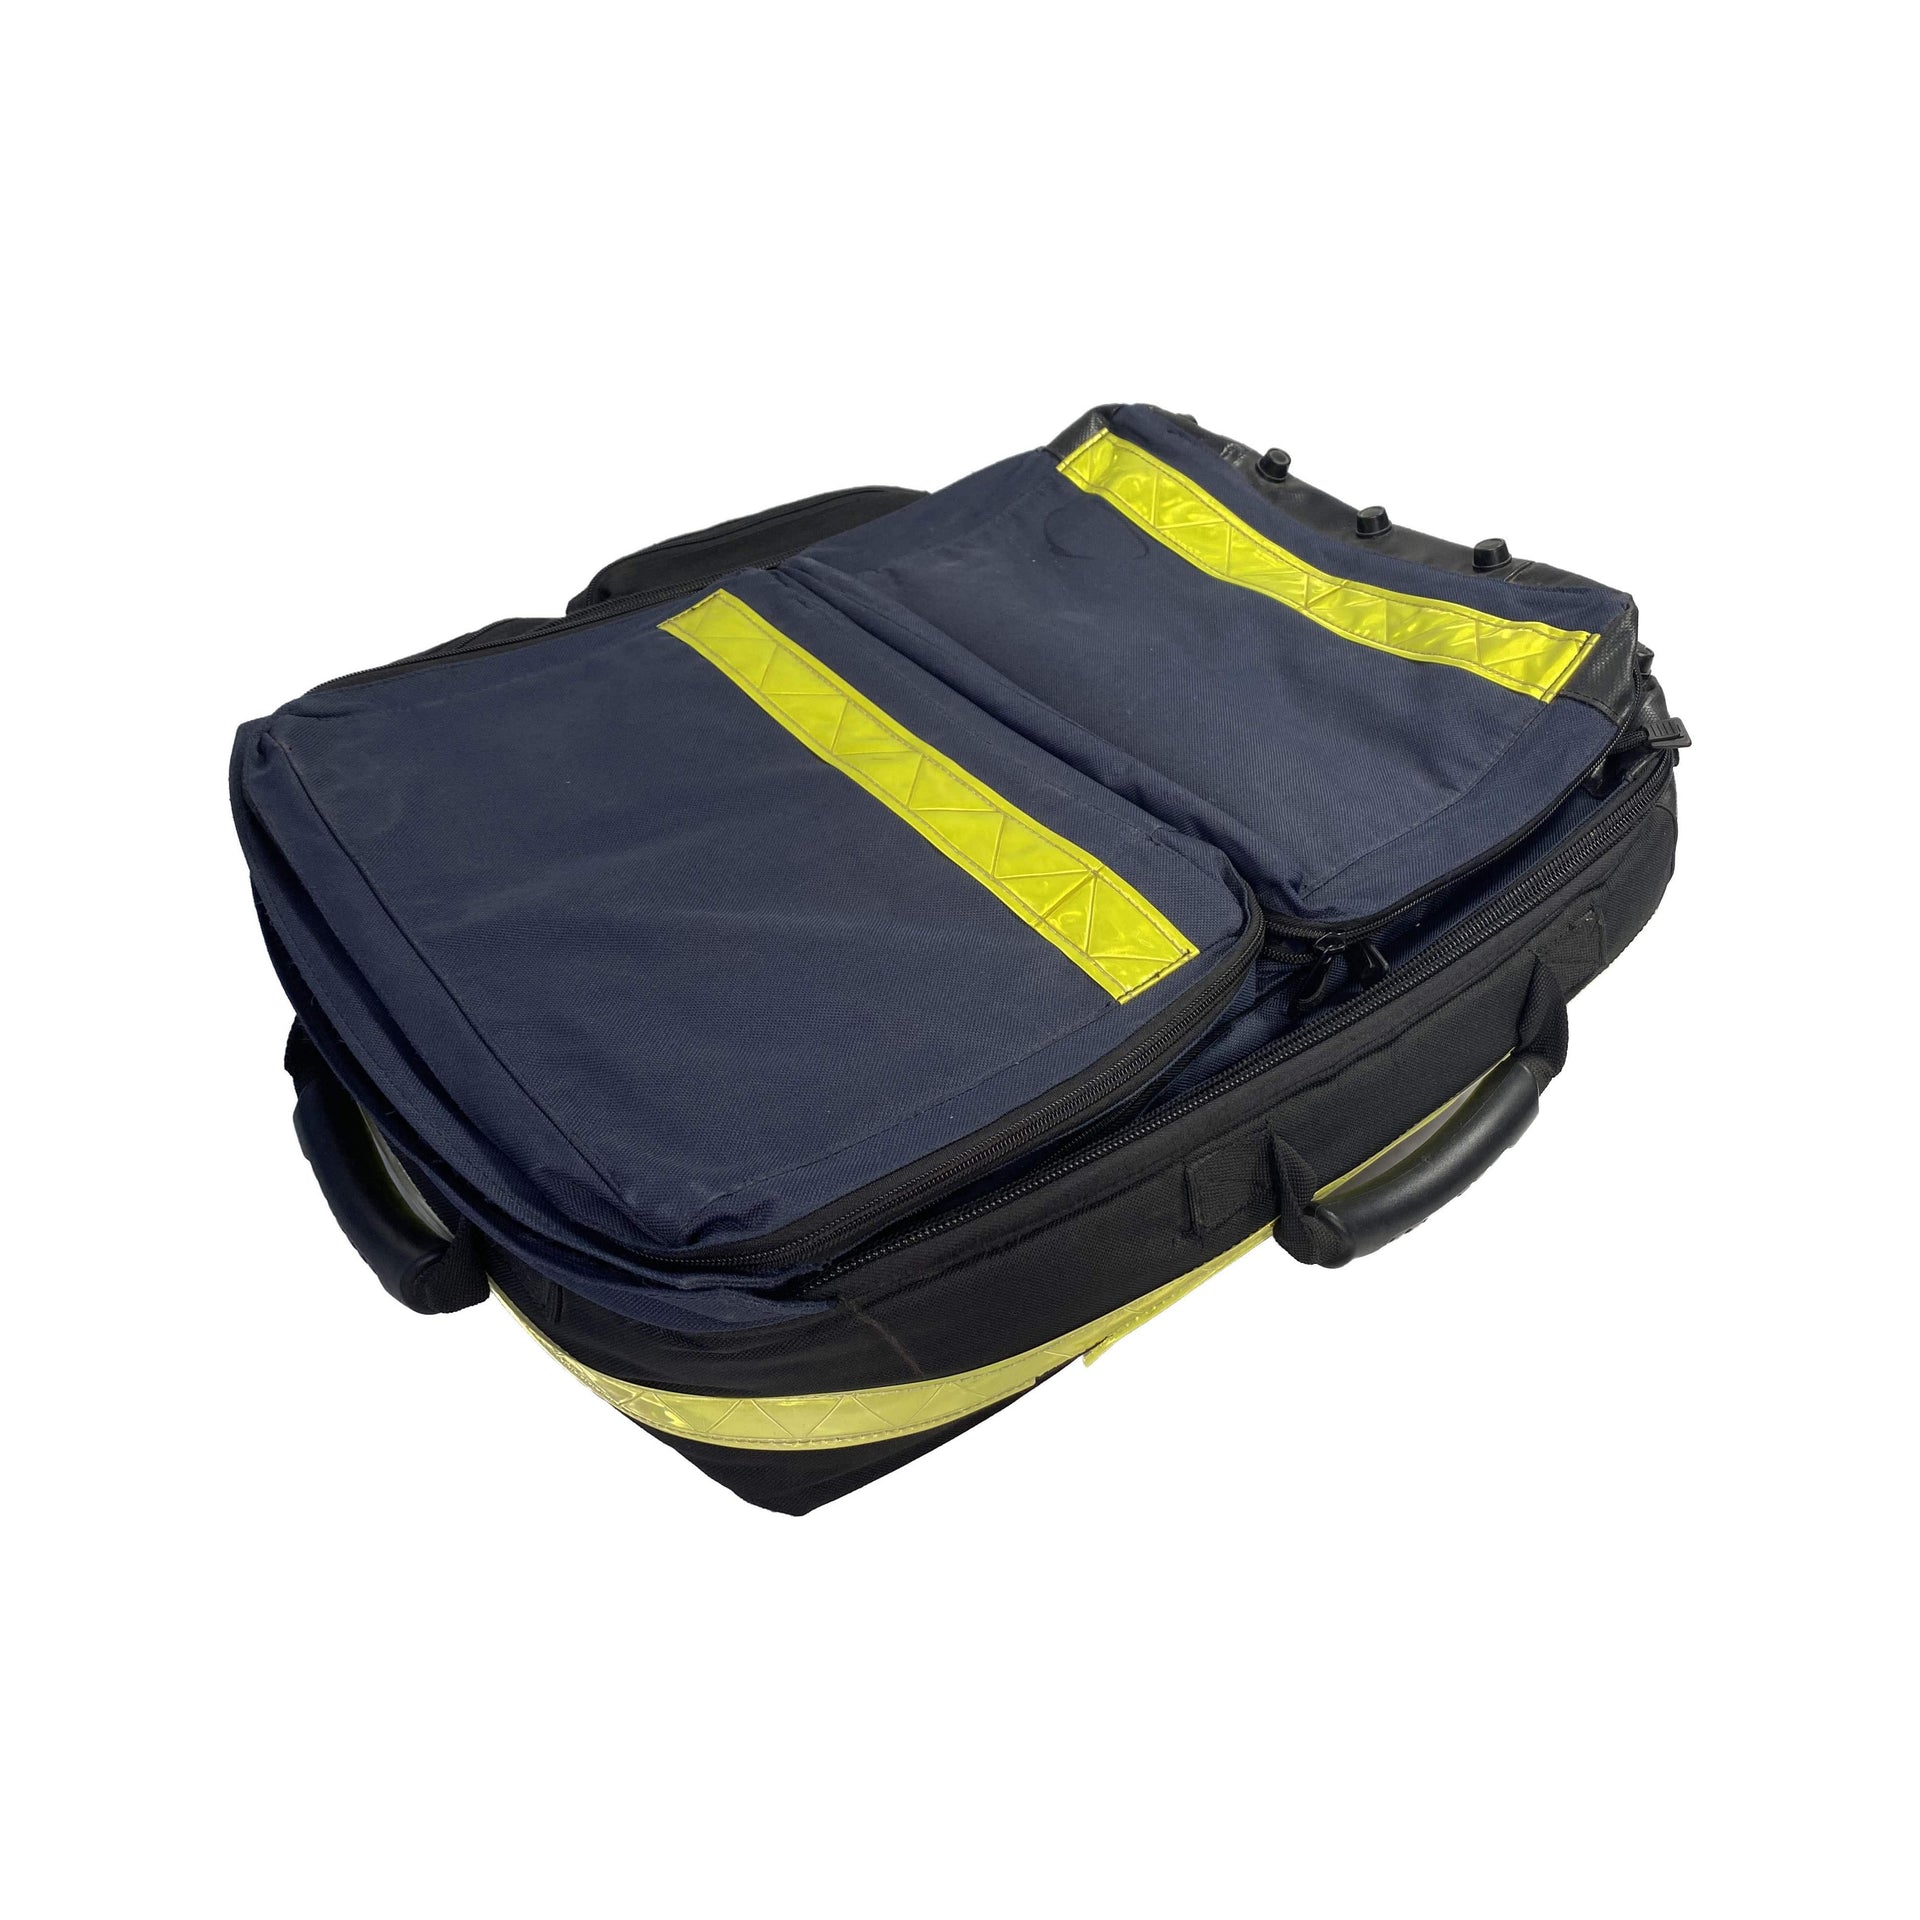 Paramedic Shop Add-Tech Pty Ltd Pouch Heavy Duty Resuscitation Medical Backpack - BAG ONLY